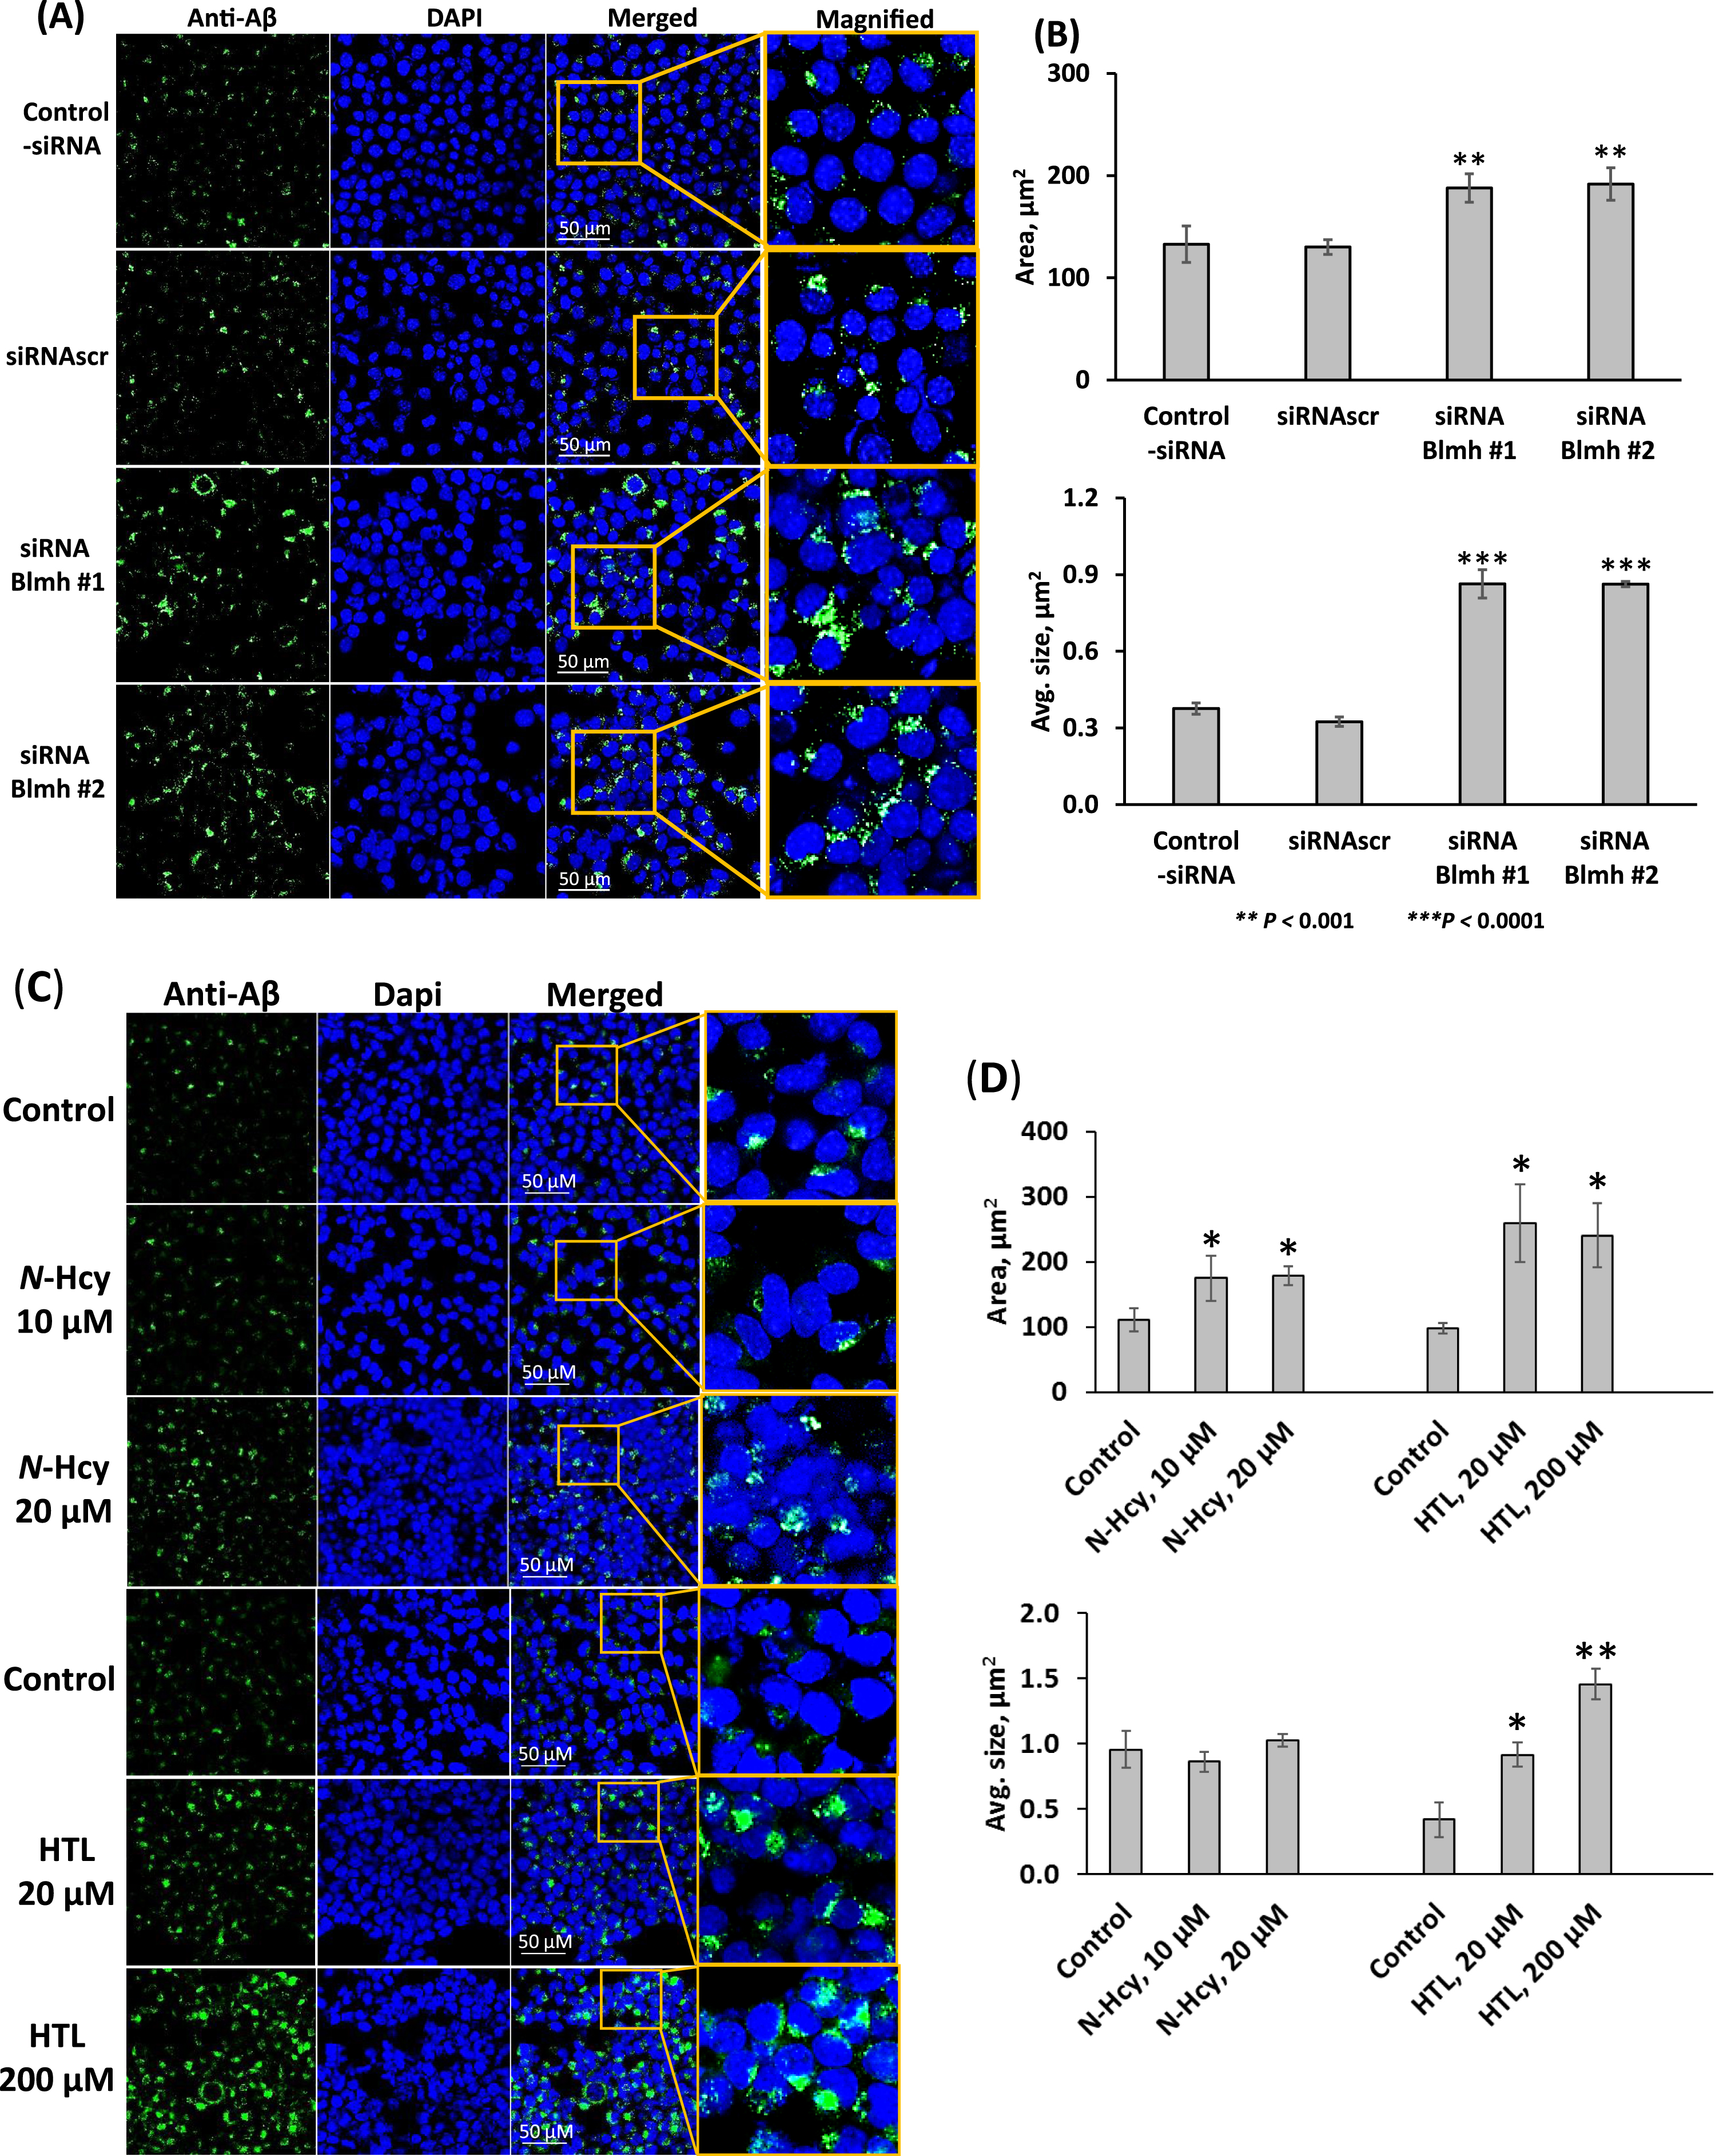 Blmh gene silencing or treatment with Hcy-thiolactone or N-Hcy-protein promotes Aβ accumulation in mouse neuroblastoma cells. Analysis of Aβ in mouse neuroblastoma N2a-APPswe cells was performed by confocal immunofluorescence microscopy using an anti-Aβ antibody. A, B) The cells were transfected with siRNAs targeting the Blmh gene (siRNA Blmh #1 and #2). Transfections without siRNA (Control -siRNA) or with scrambled siRNA (siRNAscr) were used as controls. Confocal microscopy images (A) are representative of at least N = 3 biologically independent experiments. Bar graphs (B) show the quantification of Aβ signals from Blmh-silenced and control cells. C, D) N2a-APPswe cells were treated with the indicated concentrations of N-Hcy-protein (N-Hcy) or Hcy-thiolactone (HTL) for 24 h at 37°C. Untreated cells were used as controls. Confocal microscopy images (C) are representative of at least N = 3 biologically independent experiments. Bar graphs (D) show the quantification of Aβ signals from cells treated with N-Hcy or HTL and untreated cells. Each data point is a mean ± SD of three biologically independent experiments with triplicate measurements in each. Panels (C) and (D) were reproduced with permission from [51]. p-values were calculated by one-way ANOVA with Tukey’s multiple comparisons test. *p<0.05, **p<0.001, ***p<0.0001.